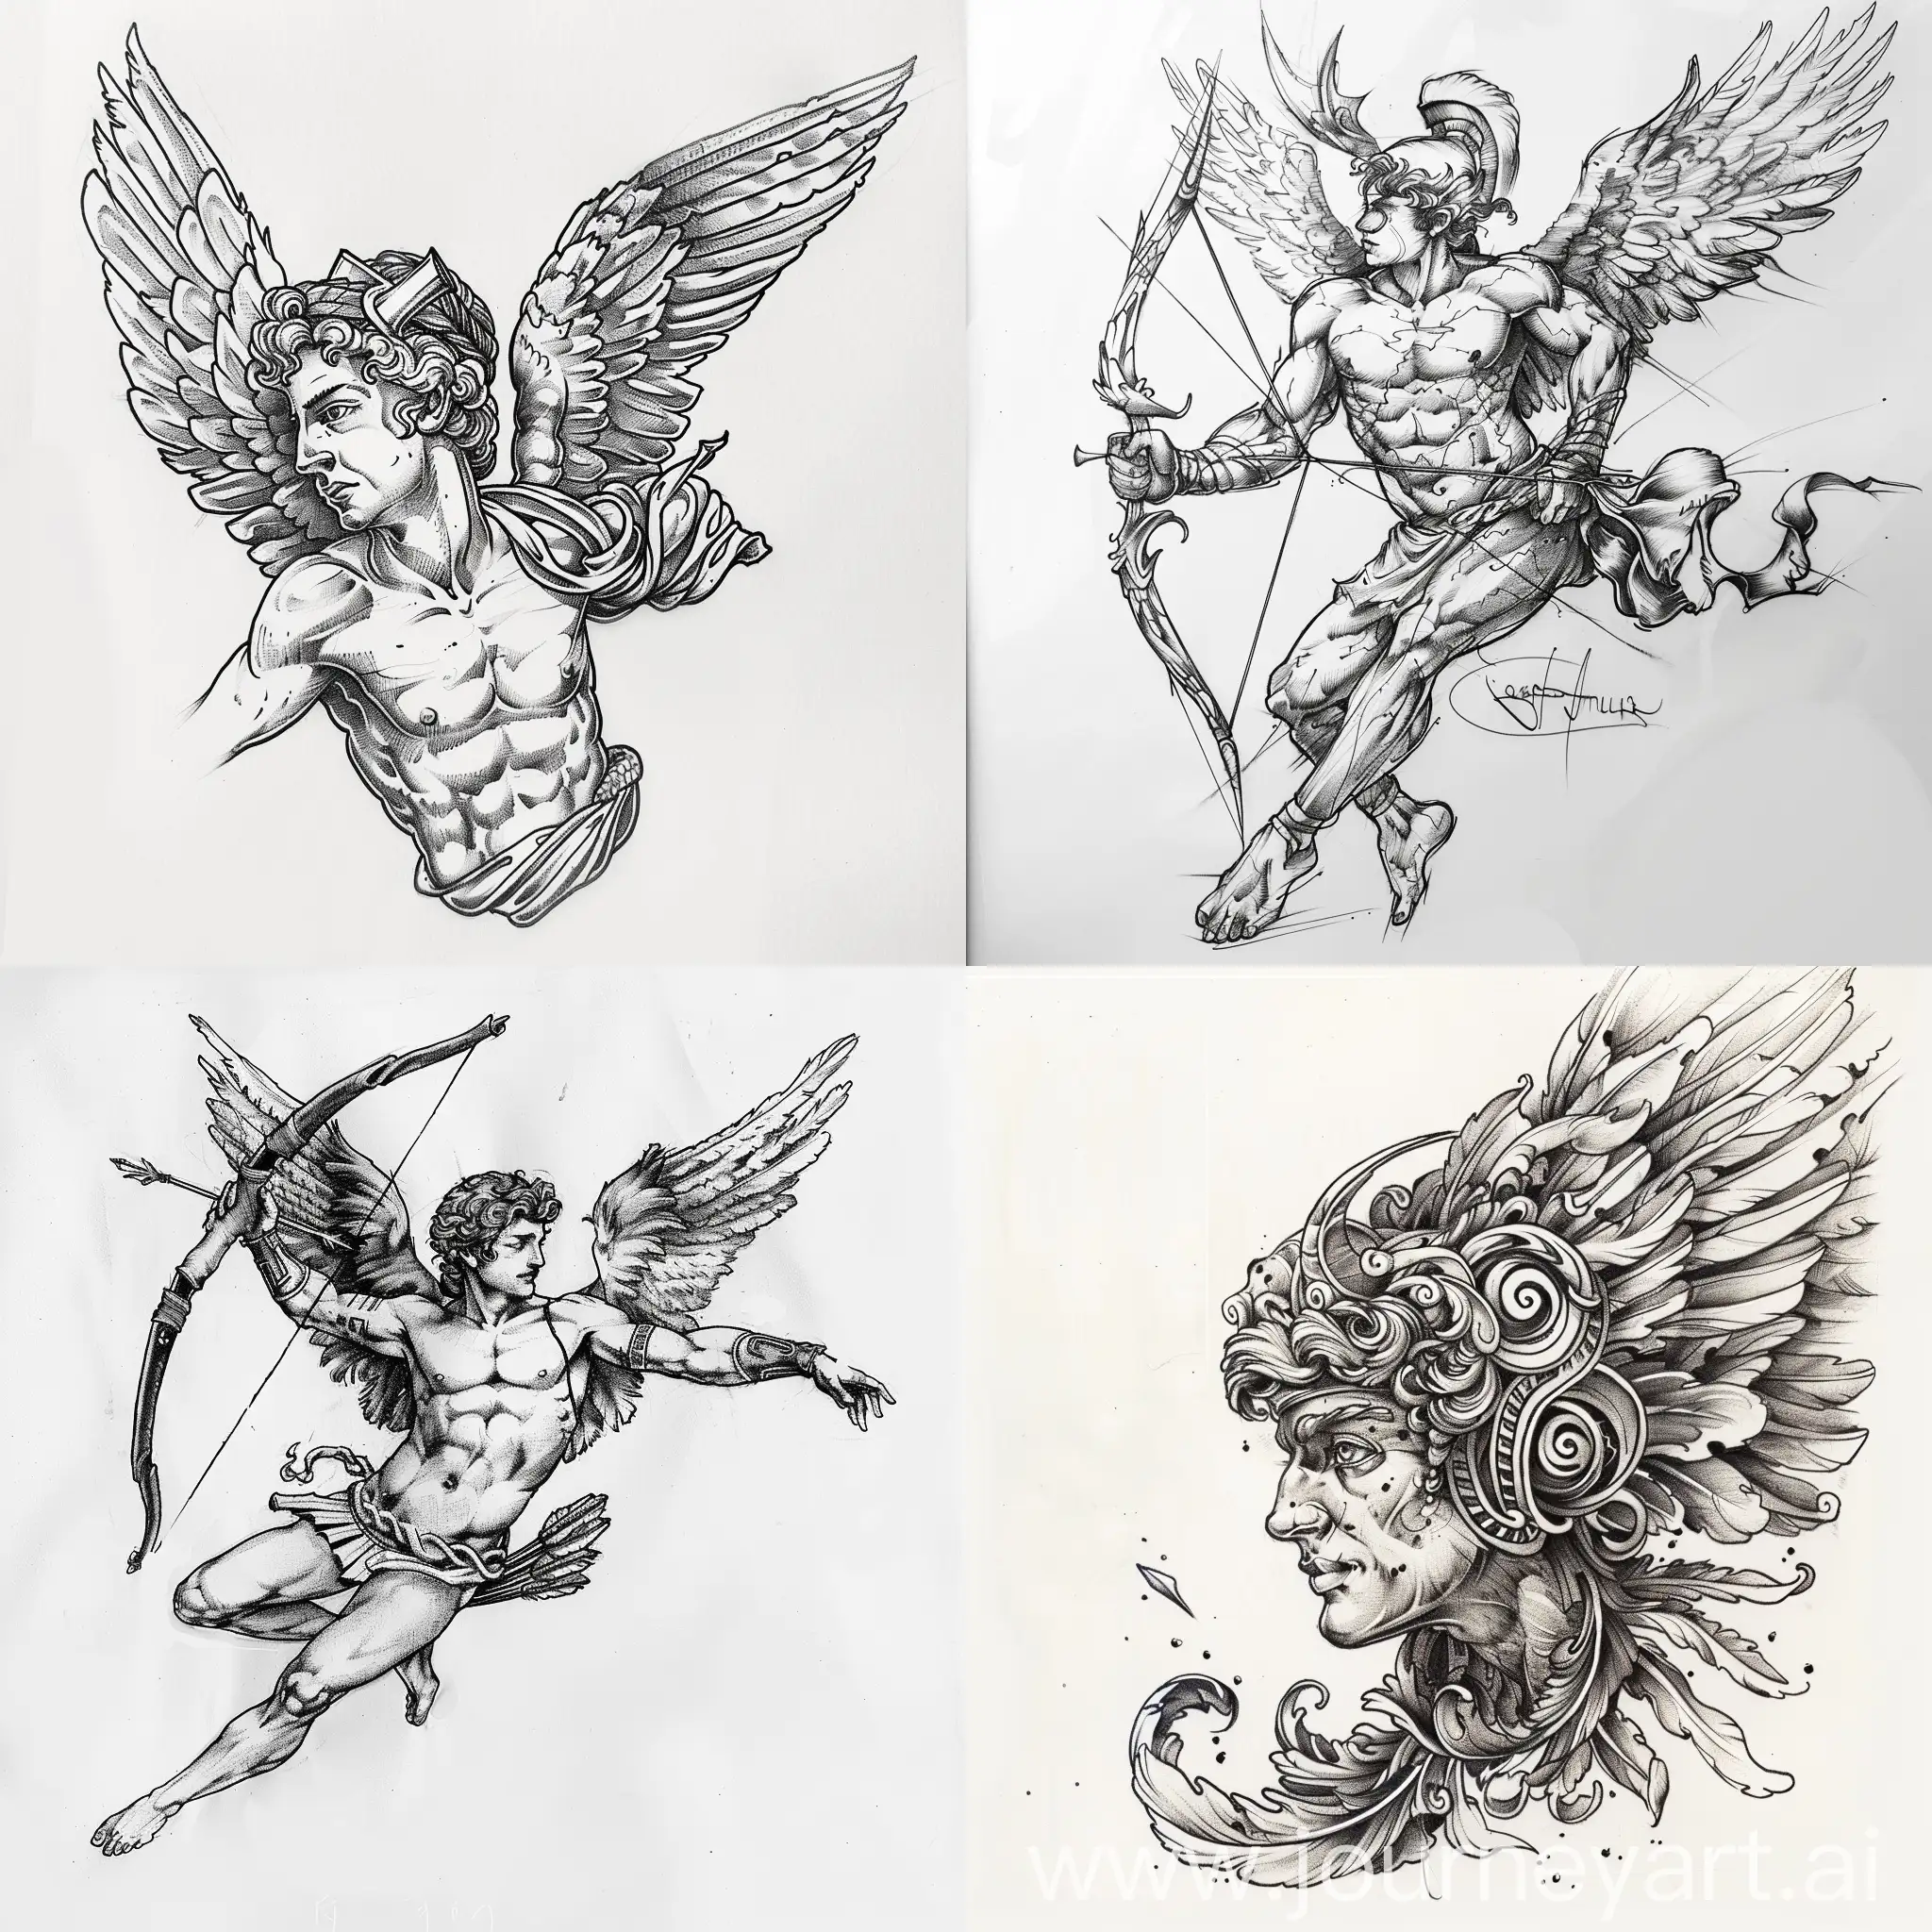 Icarus-Tattoo-Design-Sketch-on-White-Background